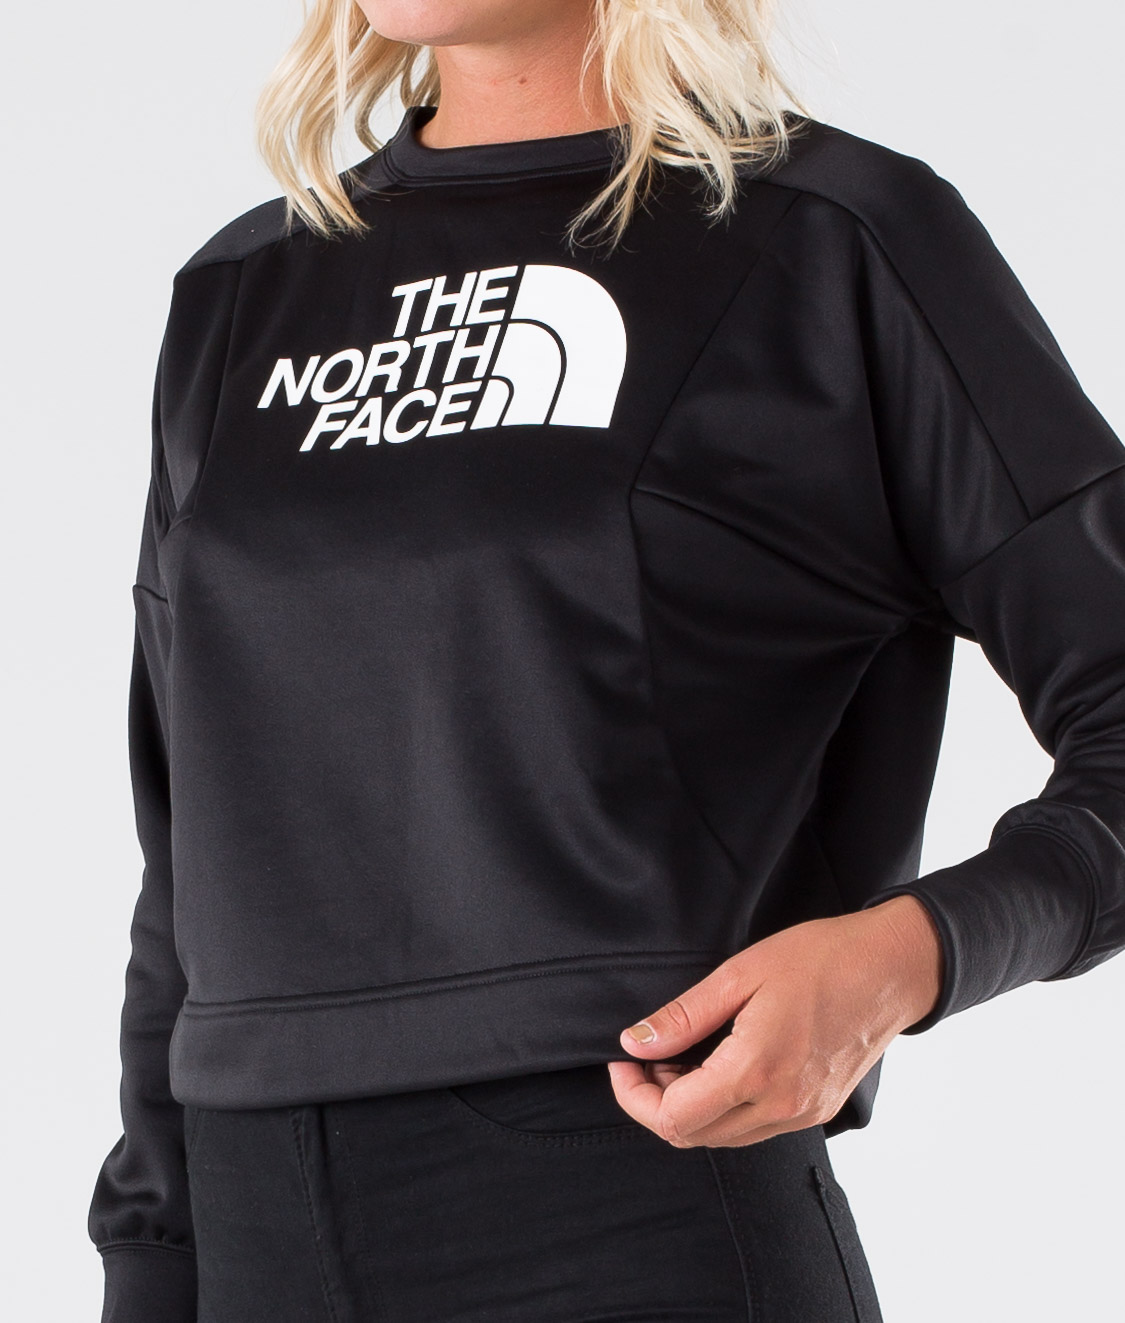 The North Face Tnl Sweater Black 